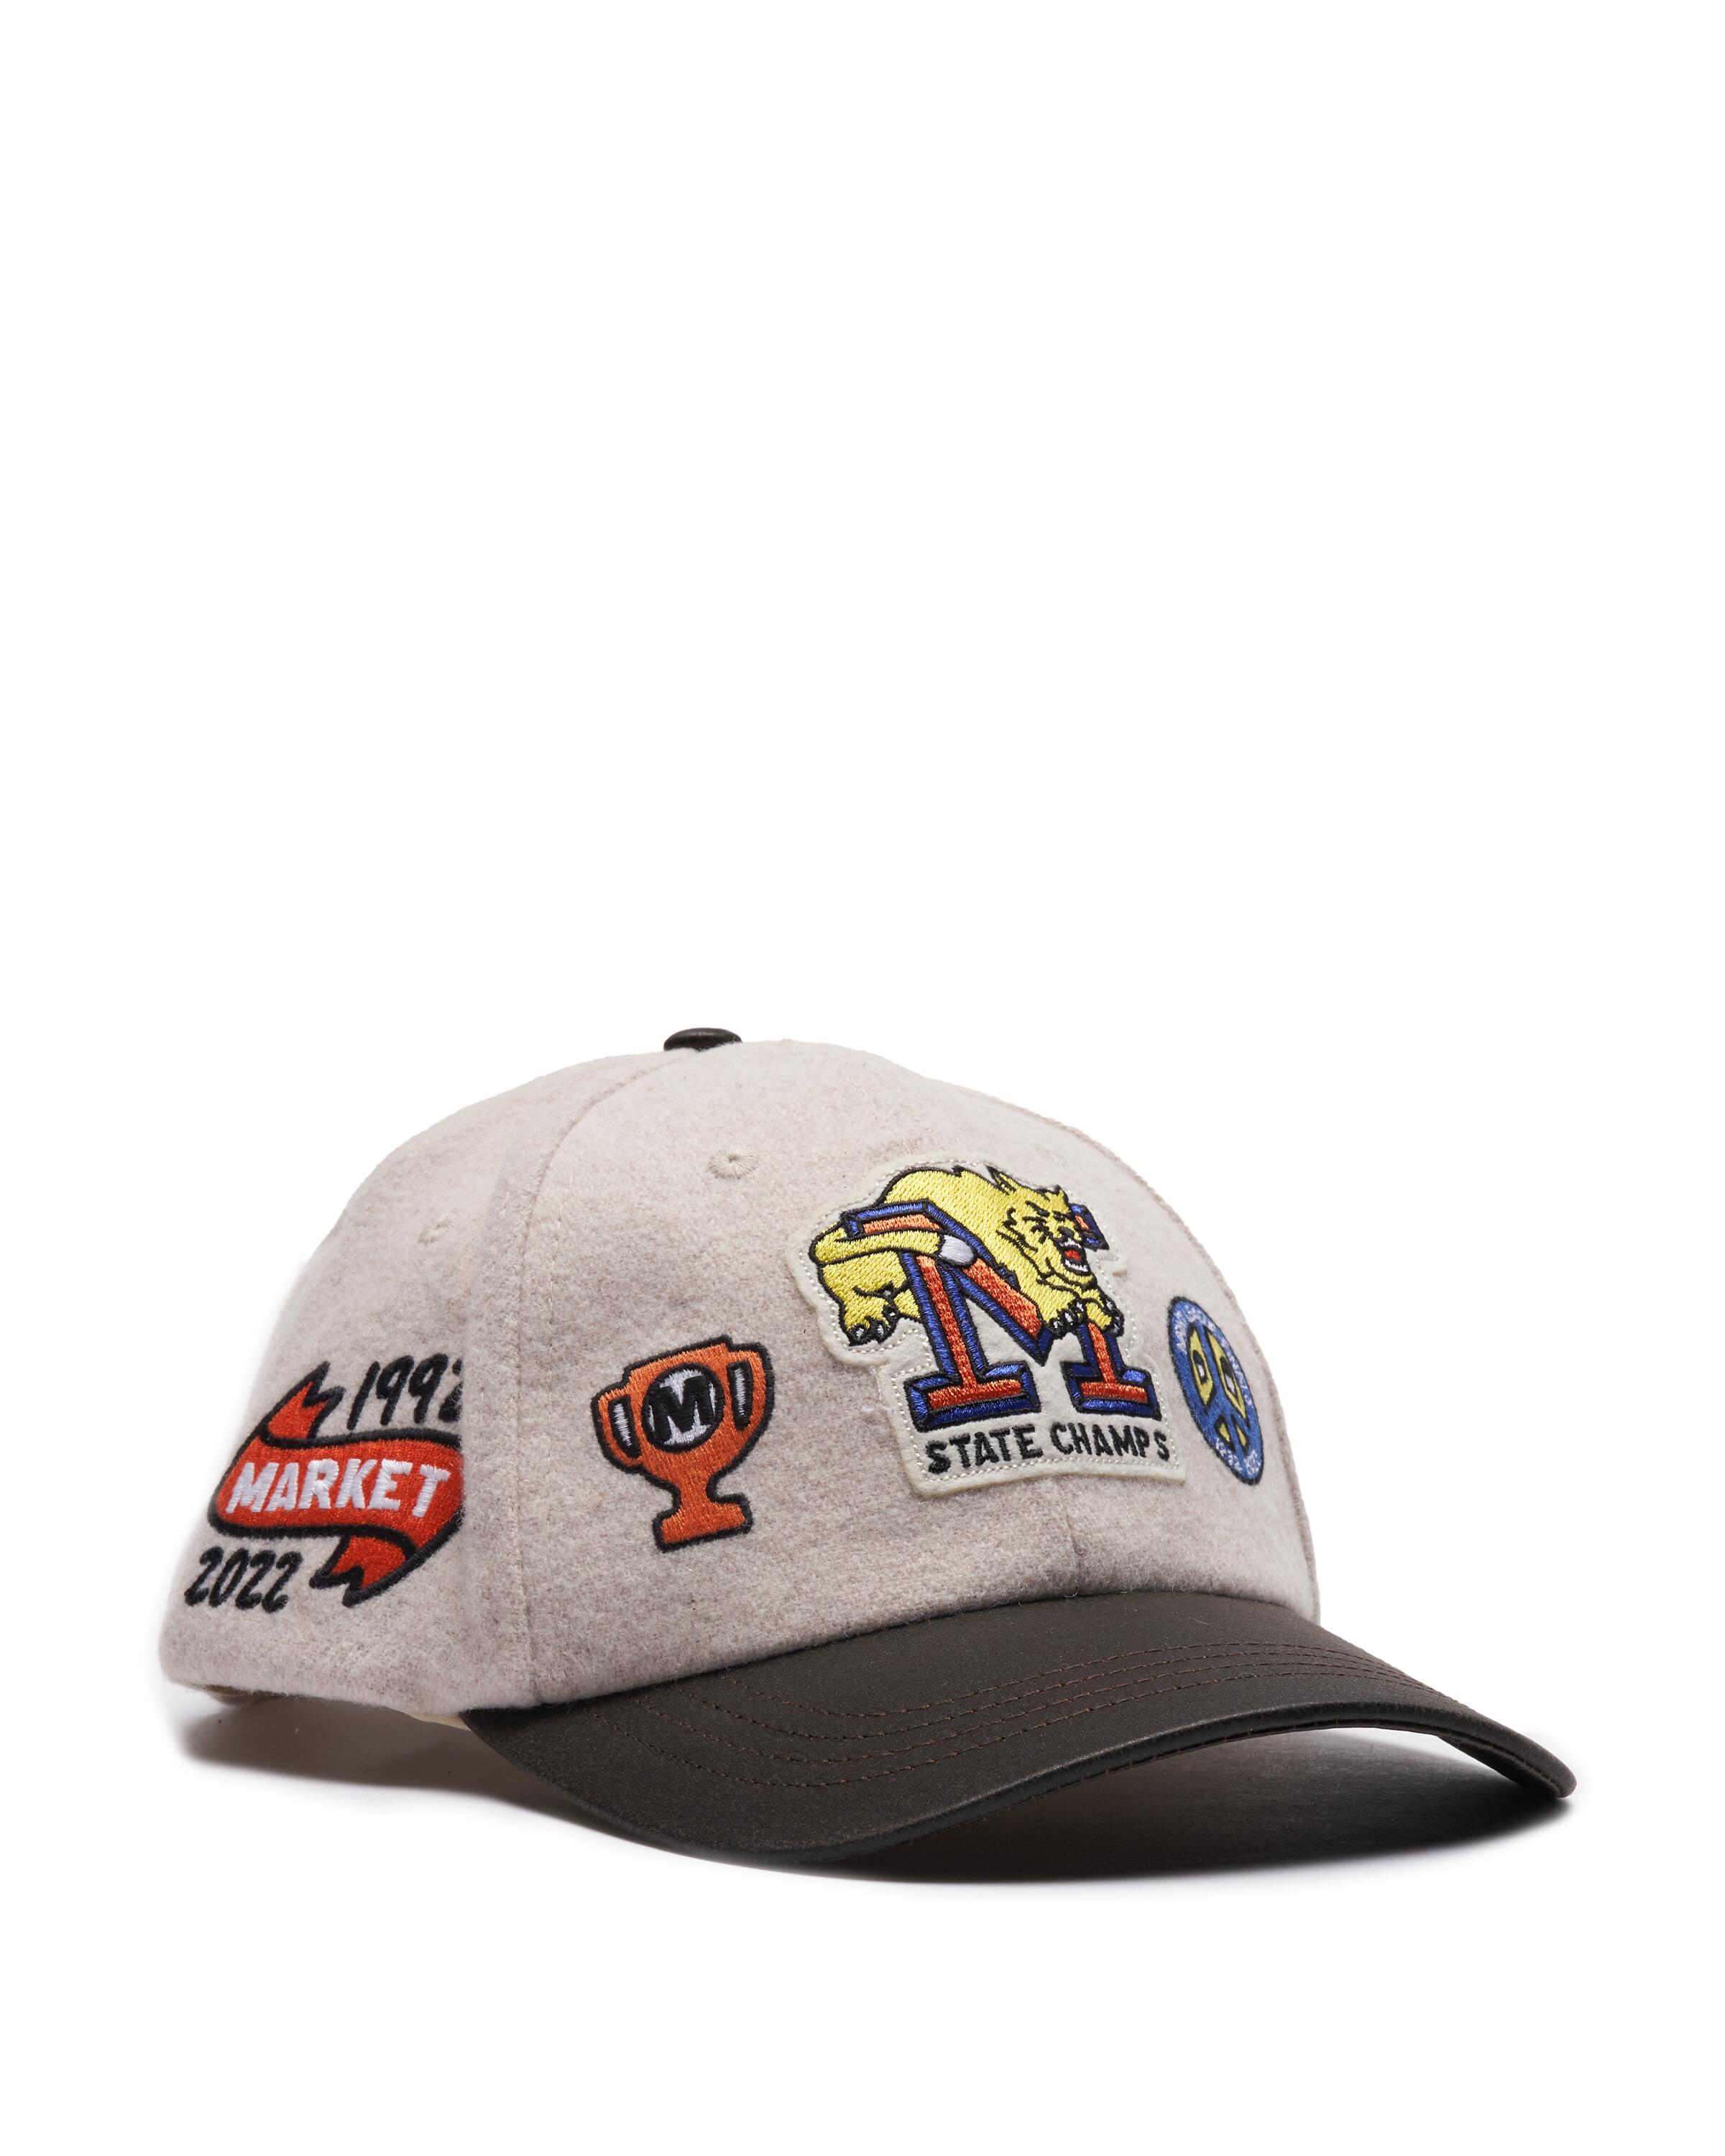 market state champs hat